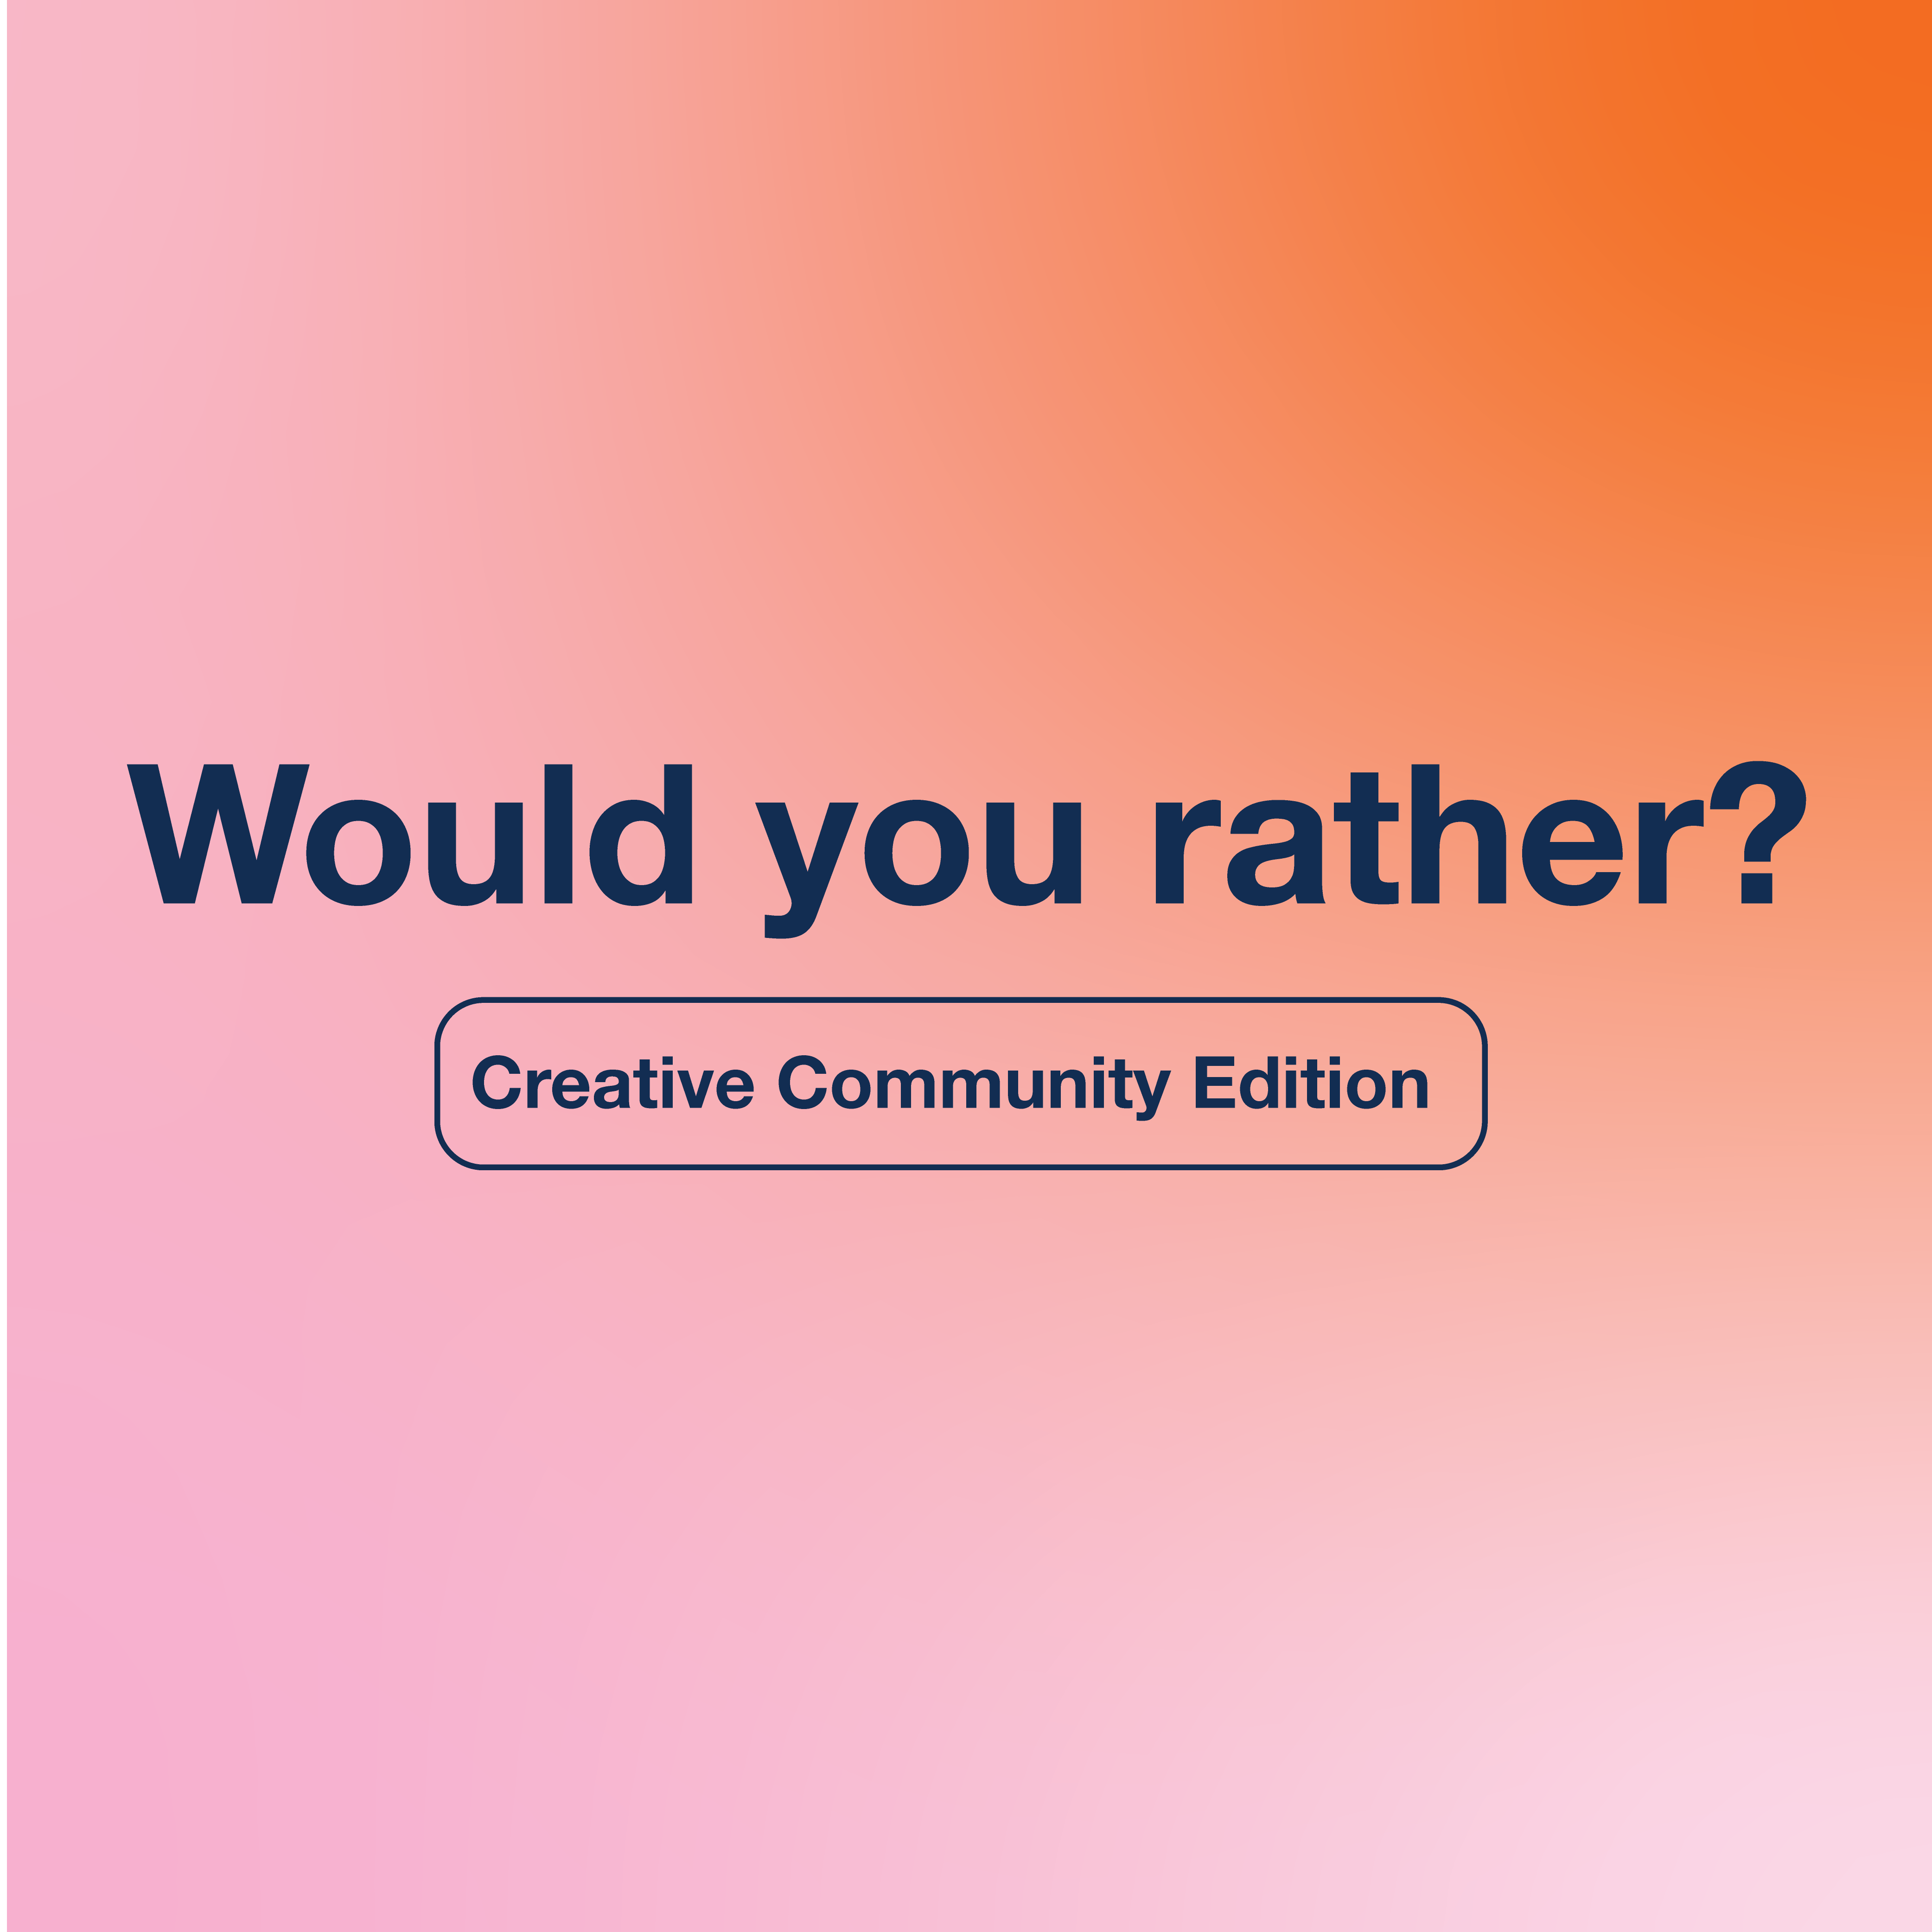 Would you rather? Creative Community Edition